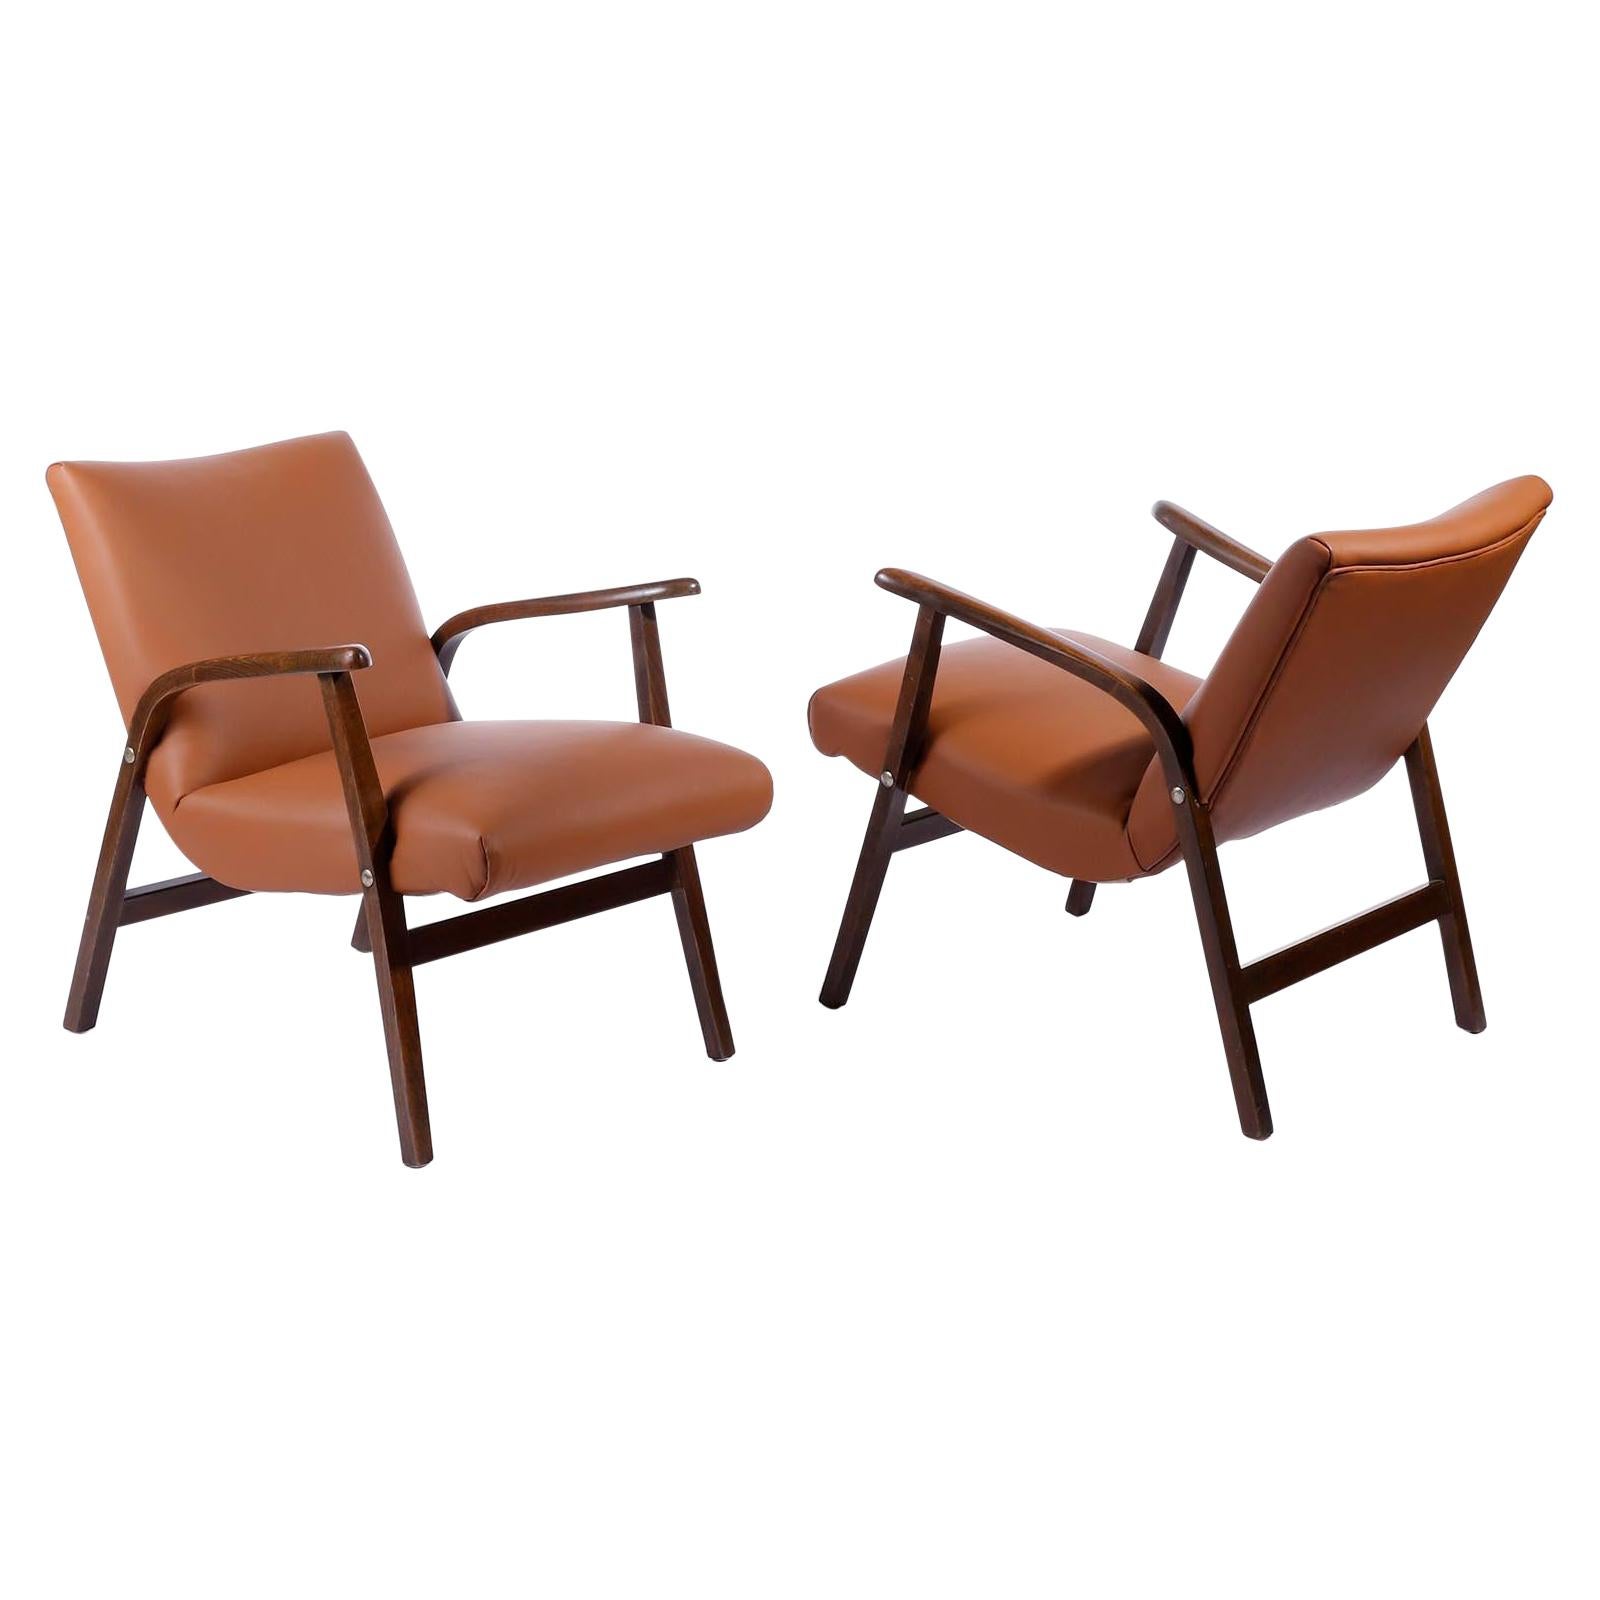 Pair of Roland Rainer Chairs Armchairs Cafe Ritter Cognac Leather Austria, 1950s